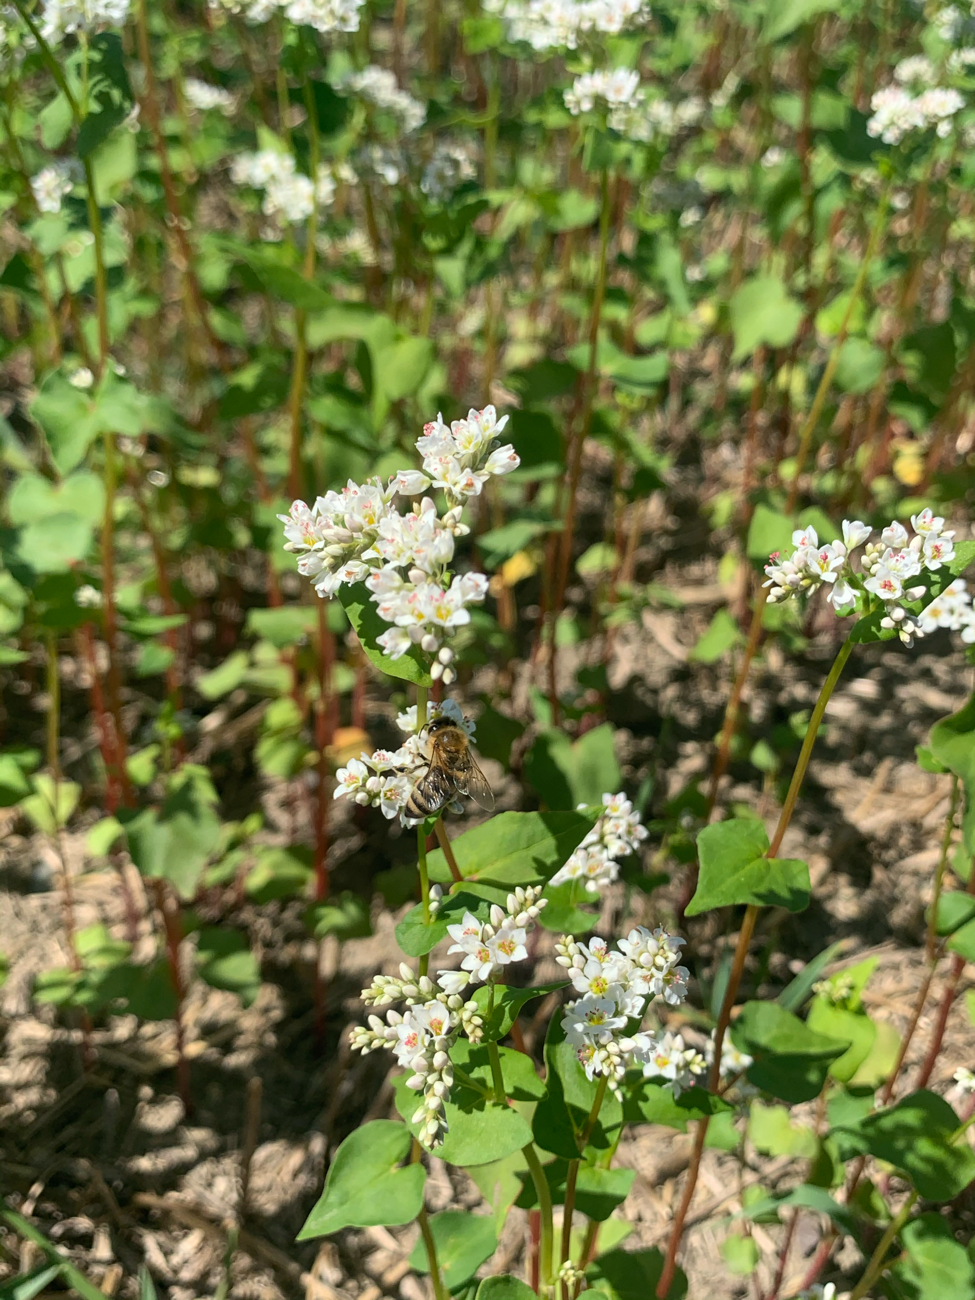 A bee out collecting nectar from the buckwheat flowers on September 2, 2021.